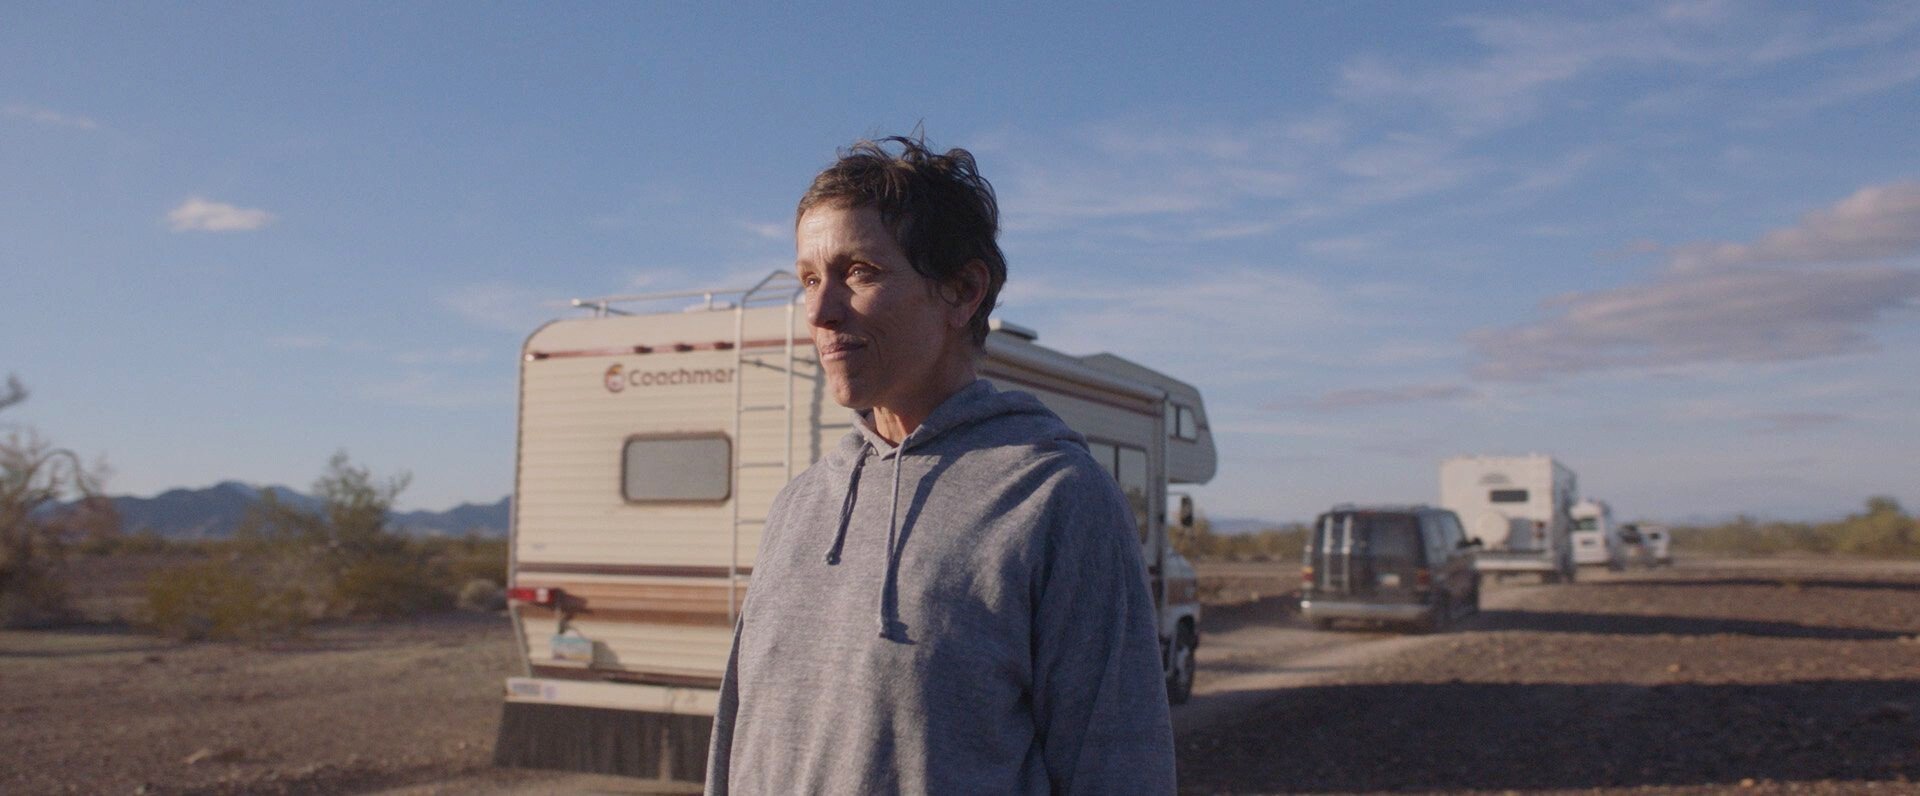 Frances McDormand in ‘Nomadland’, a film about a woman who becomes a nomad in the wake of the economic recession. Photo: Searchlight Pictures